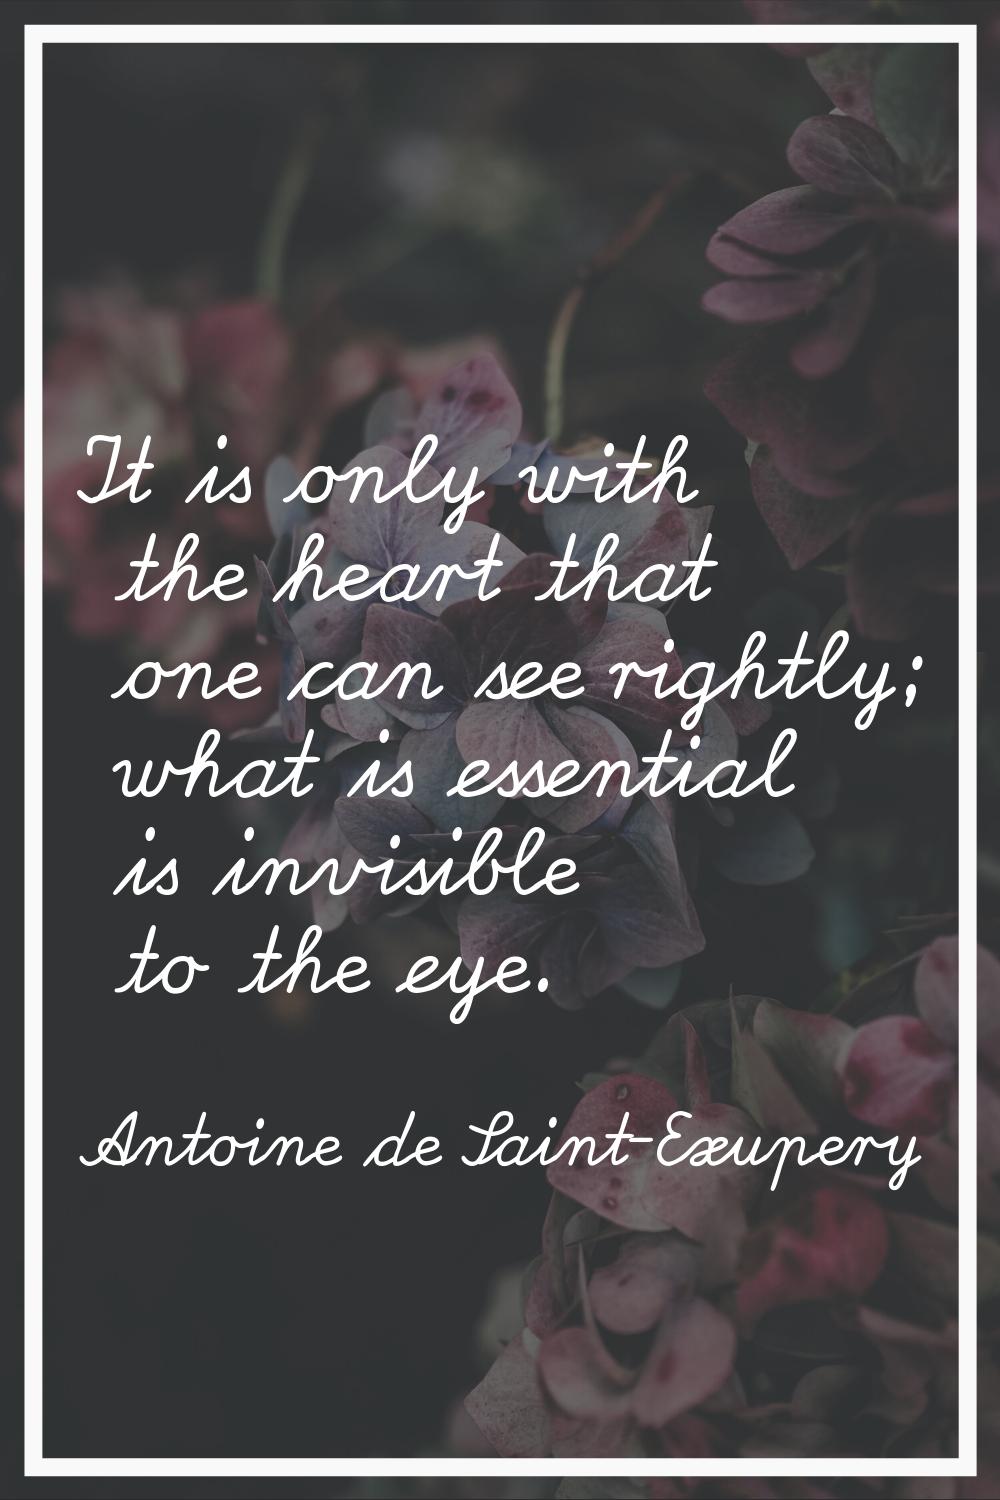 It is only with the heart that one can see rightly; what is essential is invisible to the eye.